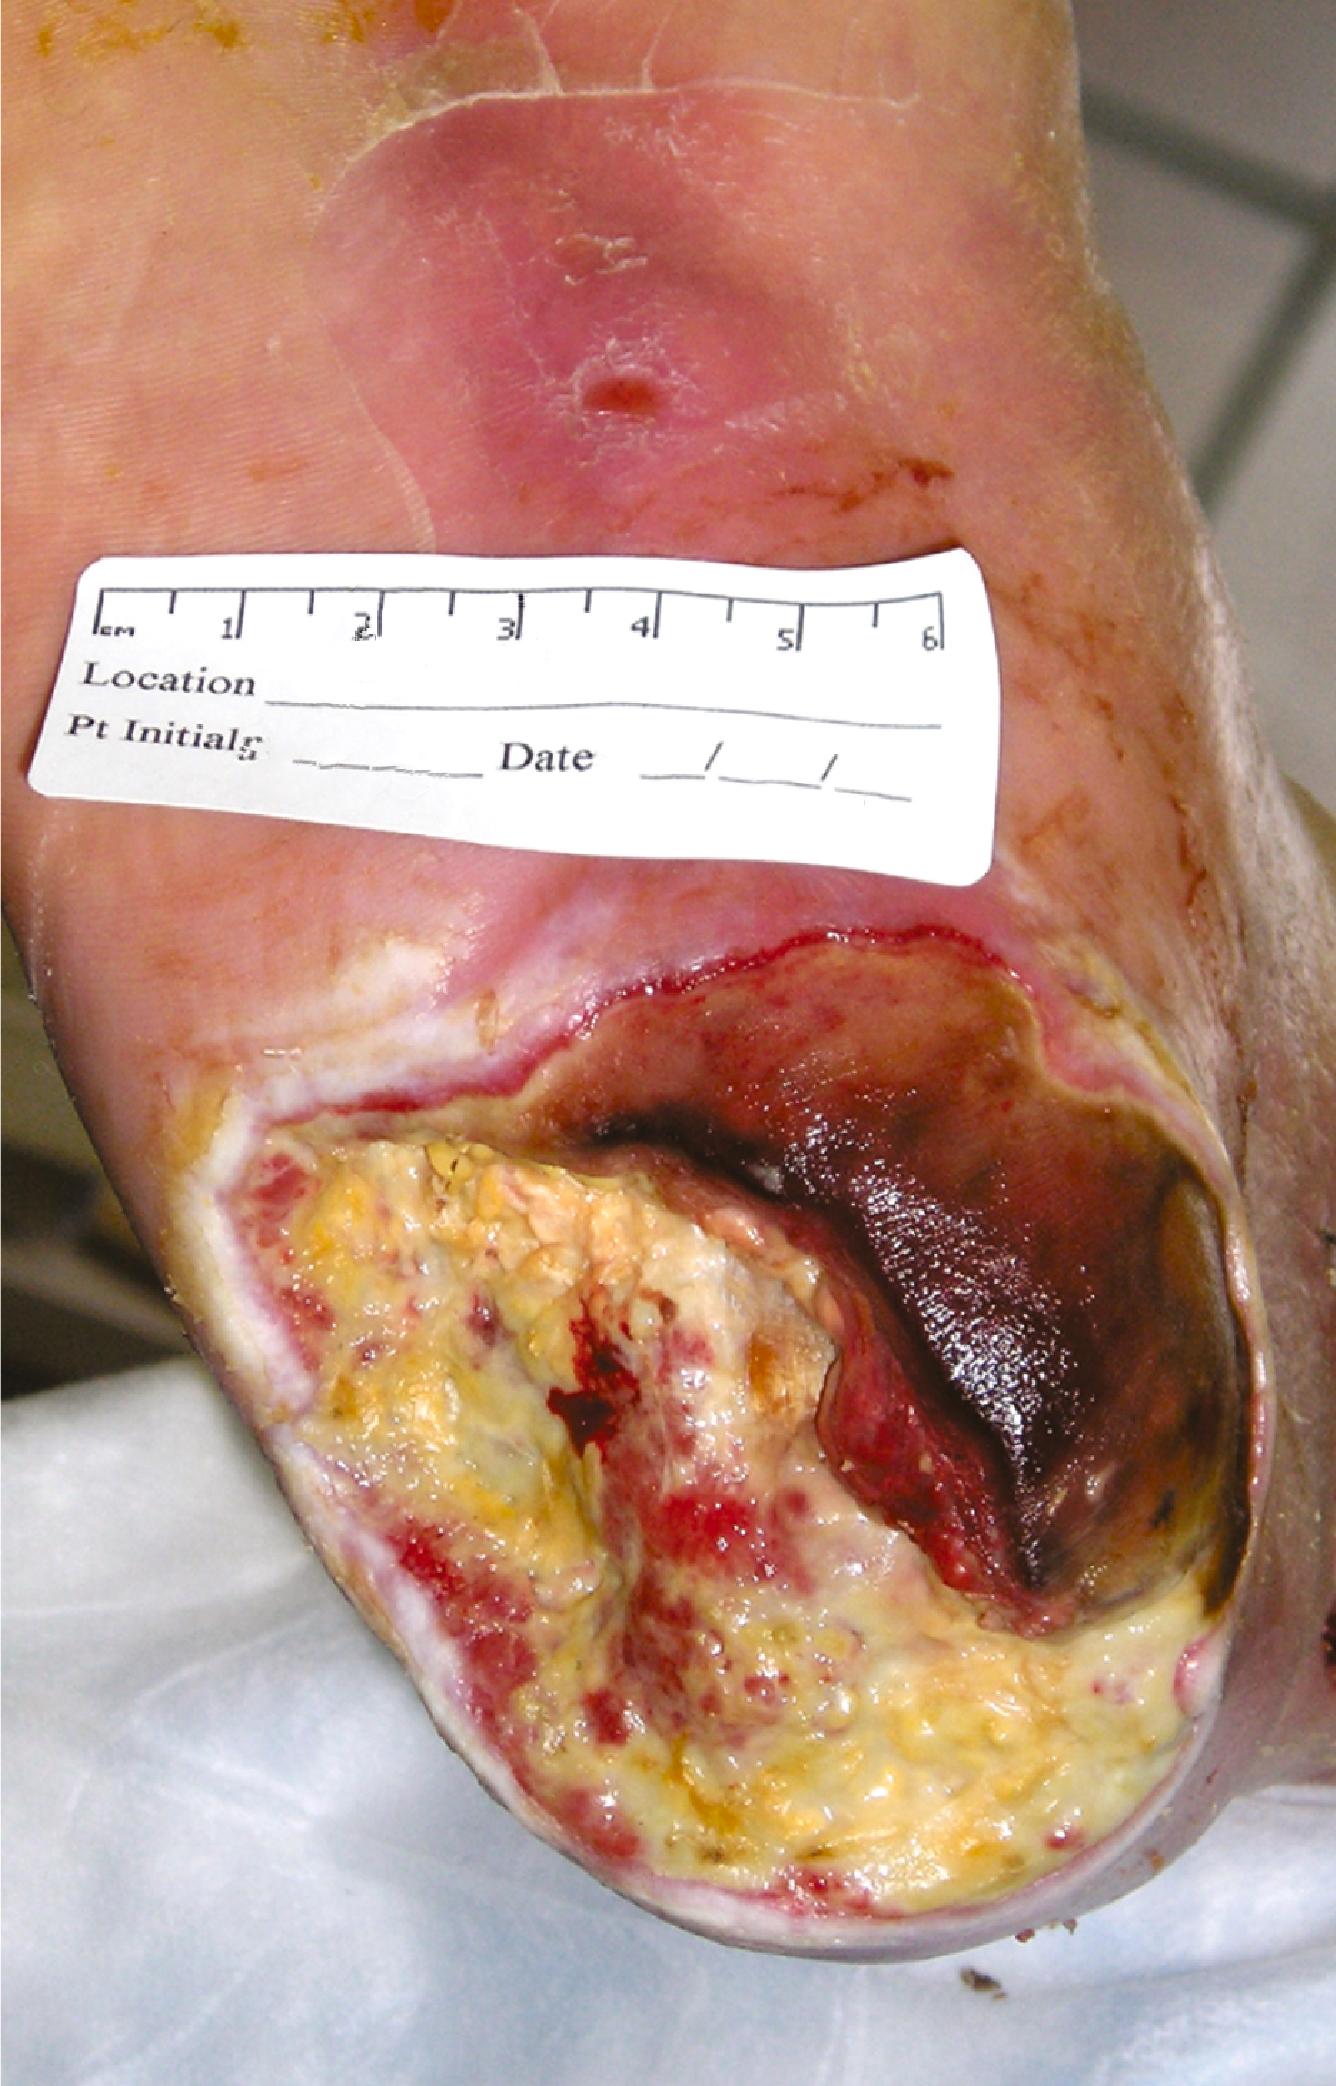 Figure 118.3, Complex heel ulcer with exposed tendon and infected bone.